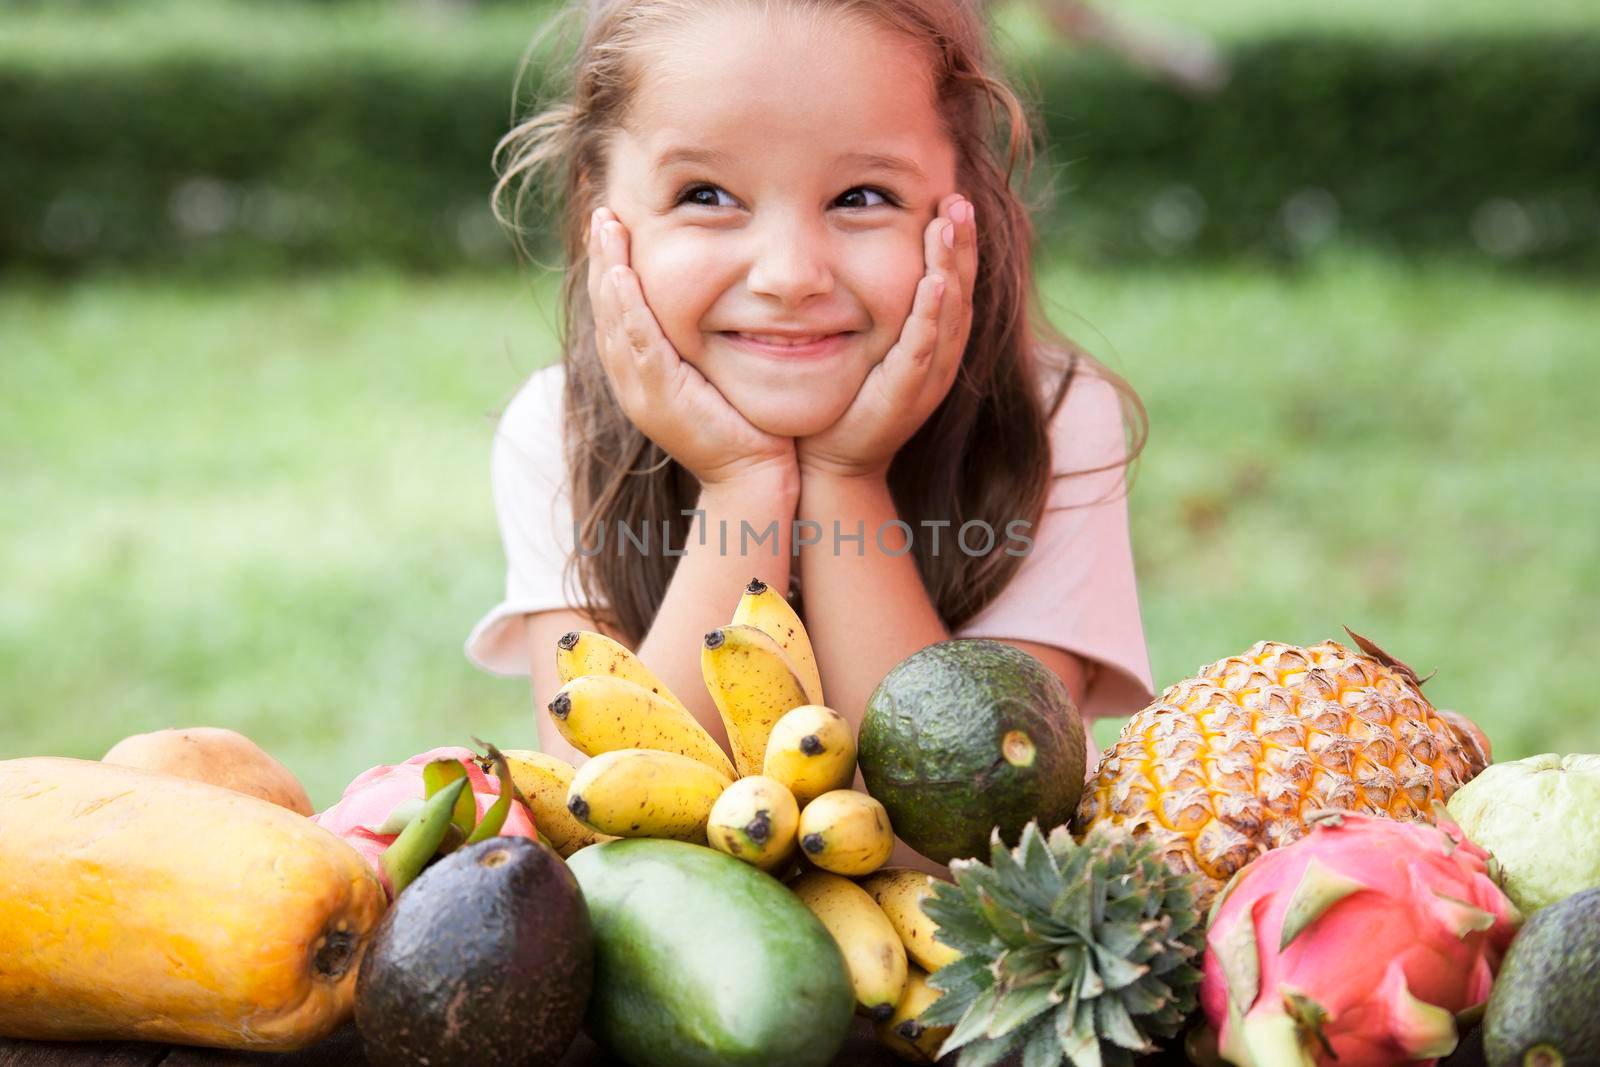 Exotic fruit on wooden table. Summer background with Laughing happy girl by Jyliana